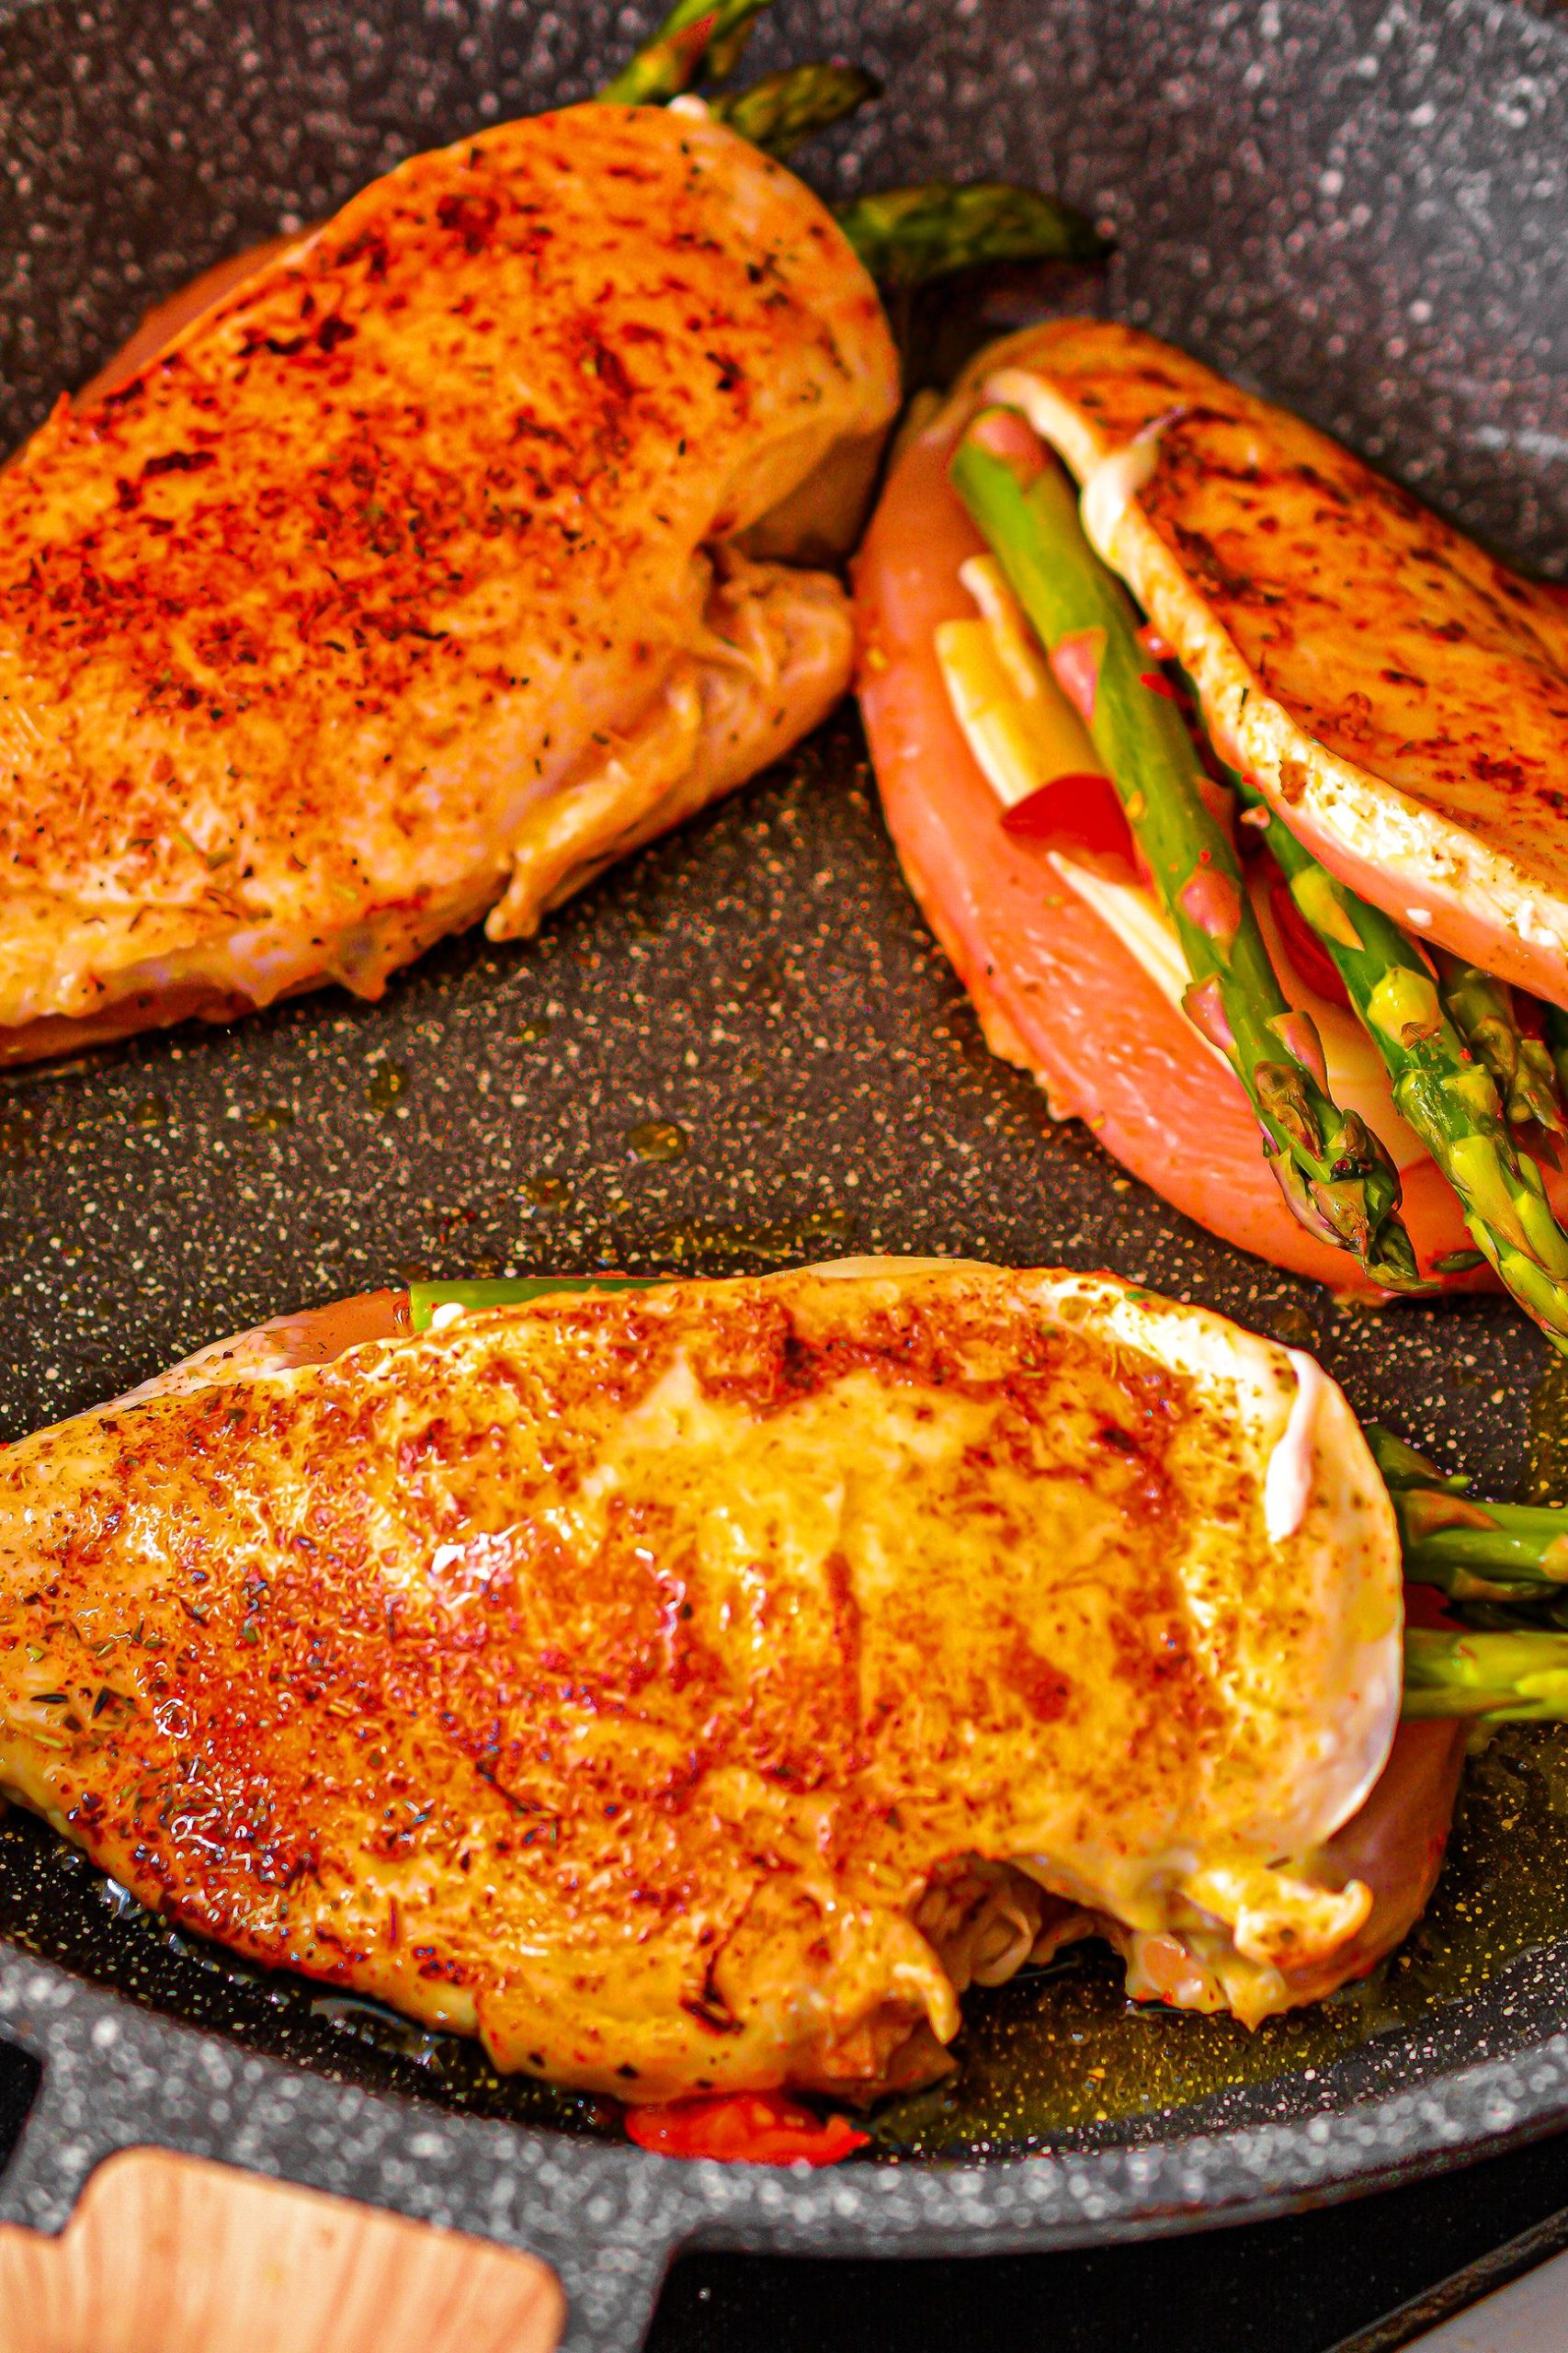 Sear both sides of the chicken breasts and transfer them to a baking sheet.